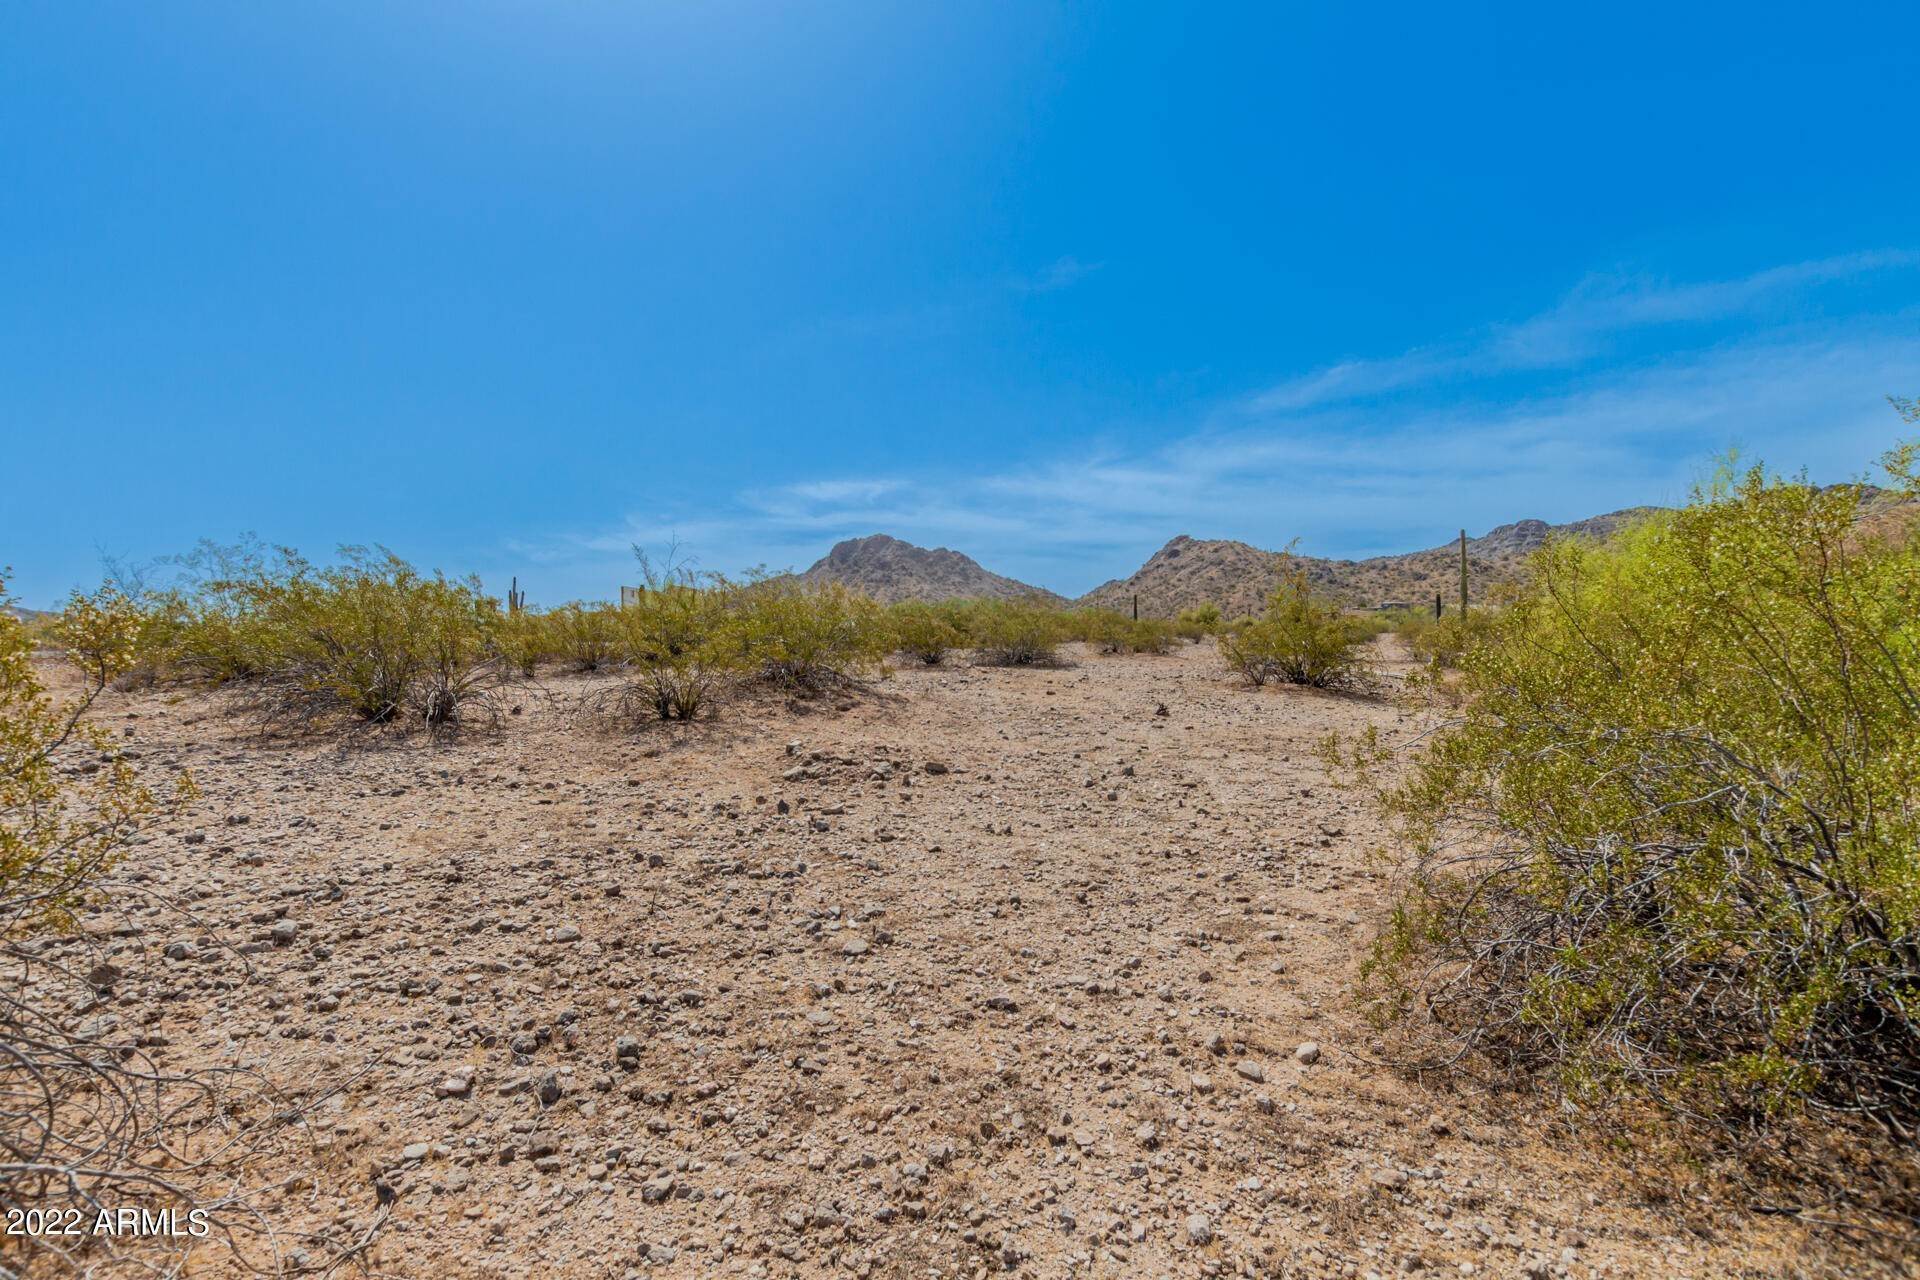 12. Land for Sale at Goodyear, AZ 85338